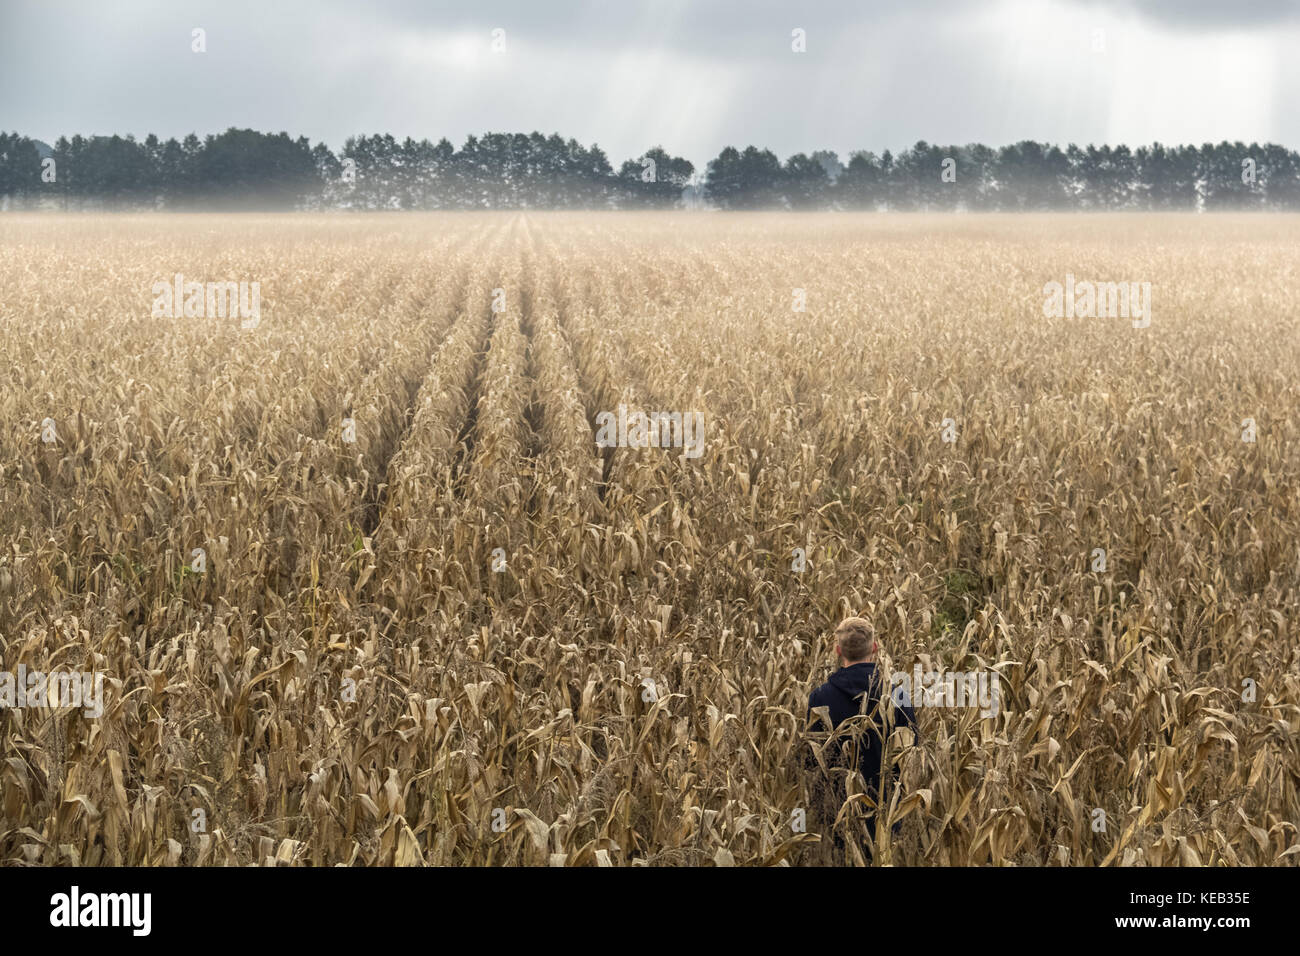 a man standing alone in a corn field. It is a magical moment where the fog cleared and a few rays of sunlight paved the way through the clouds. Stock Photo